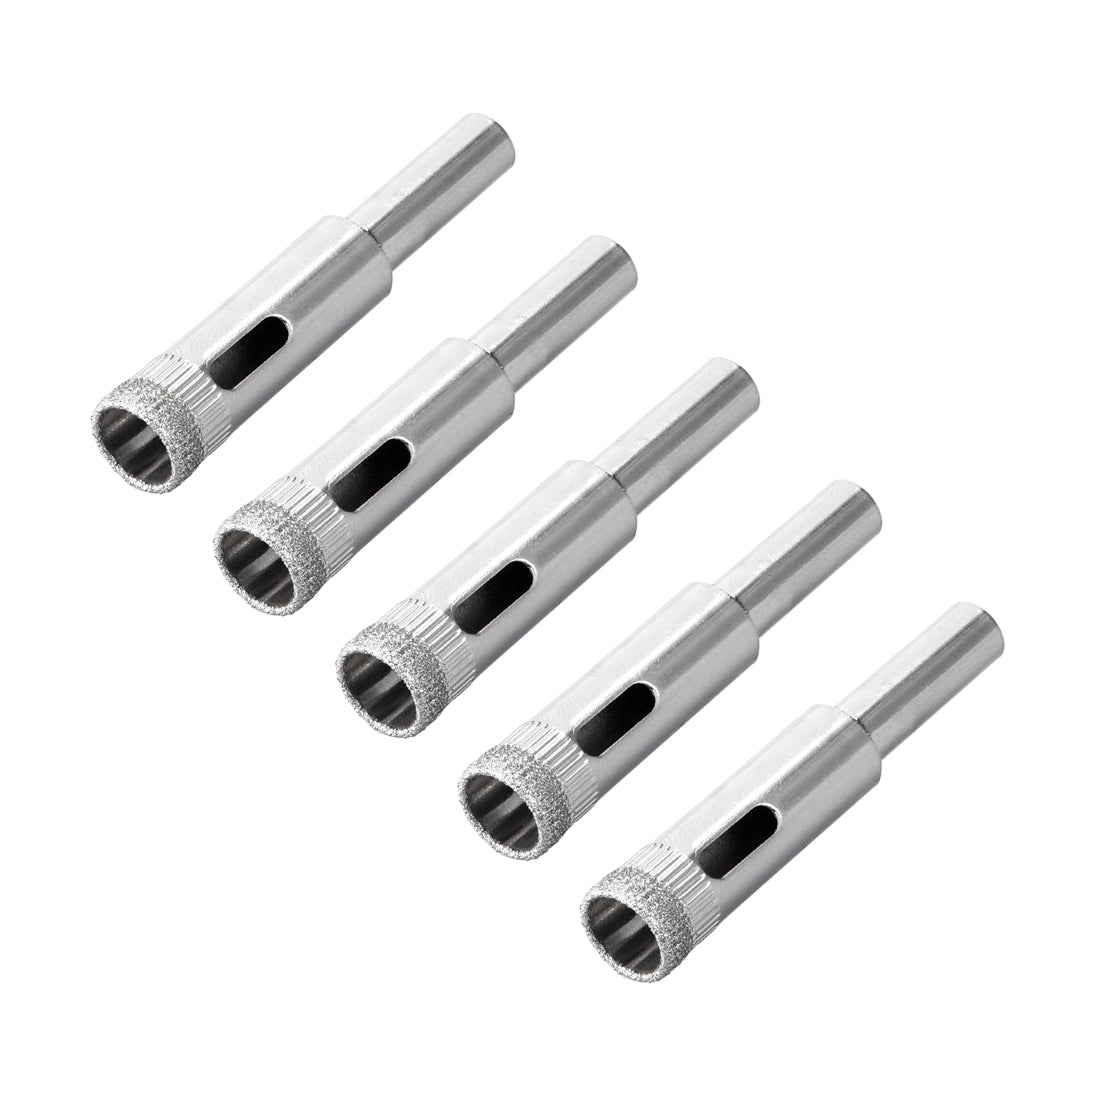 Uxcell Uxcell 6mm Diamond Drill Bits Hole Saws for Glass Ceramic Porcelain Tiles 5 Pcs